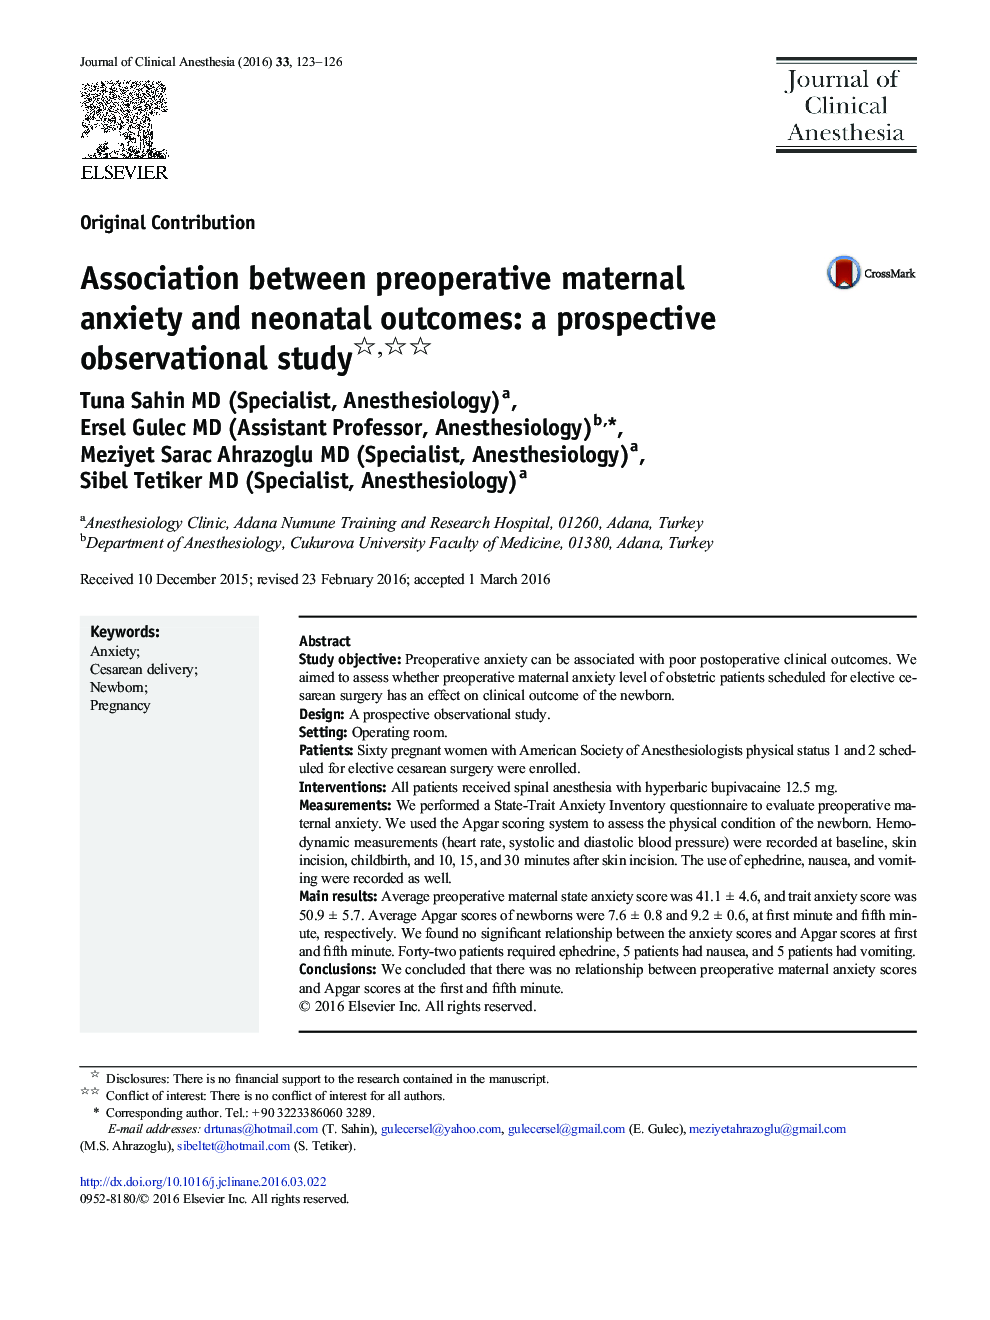 Association between preoperative maternal anxiety and neonatal outcomes: a prospective observational study 